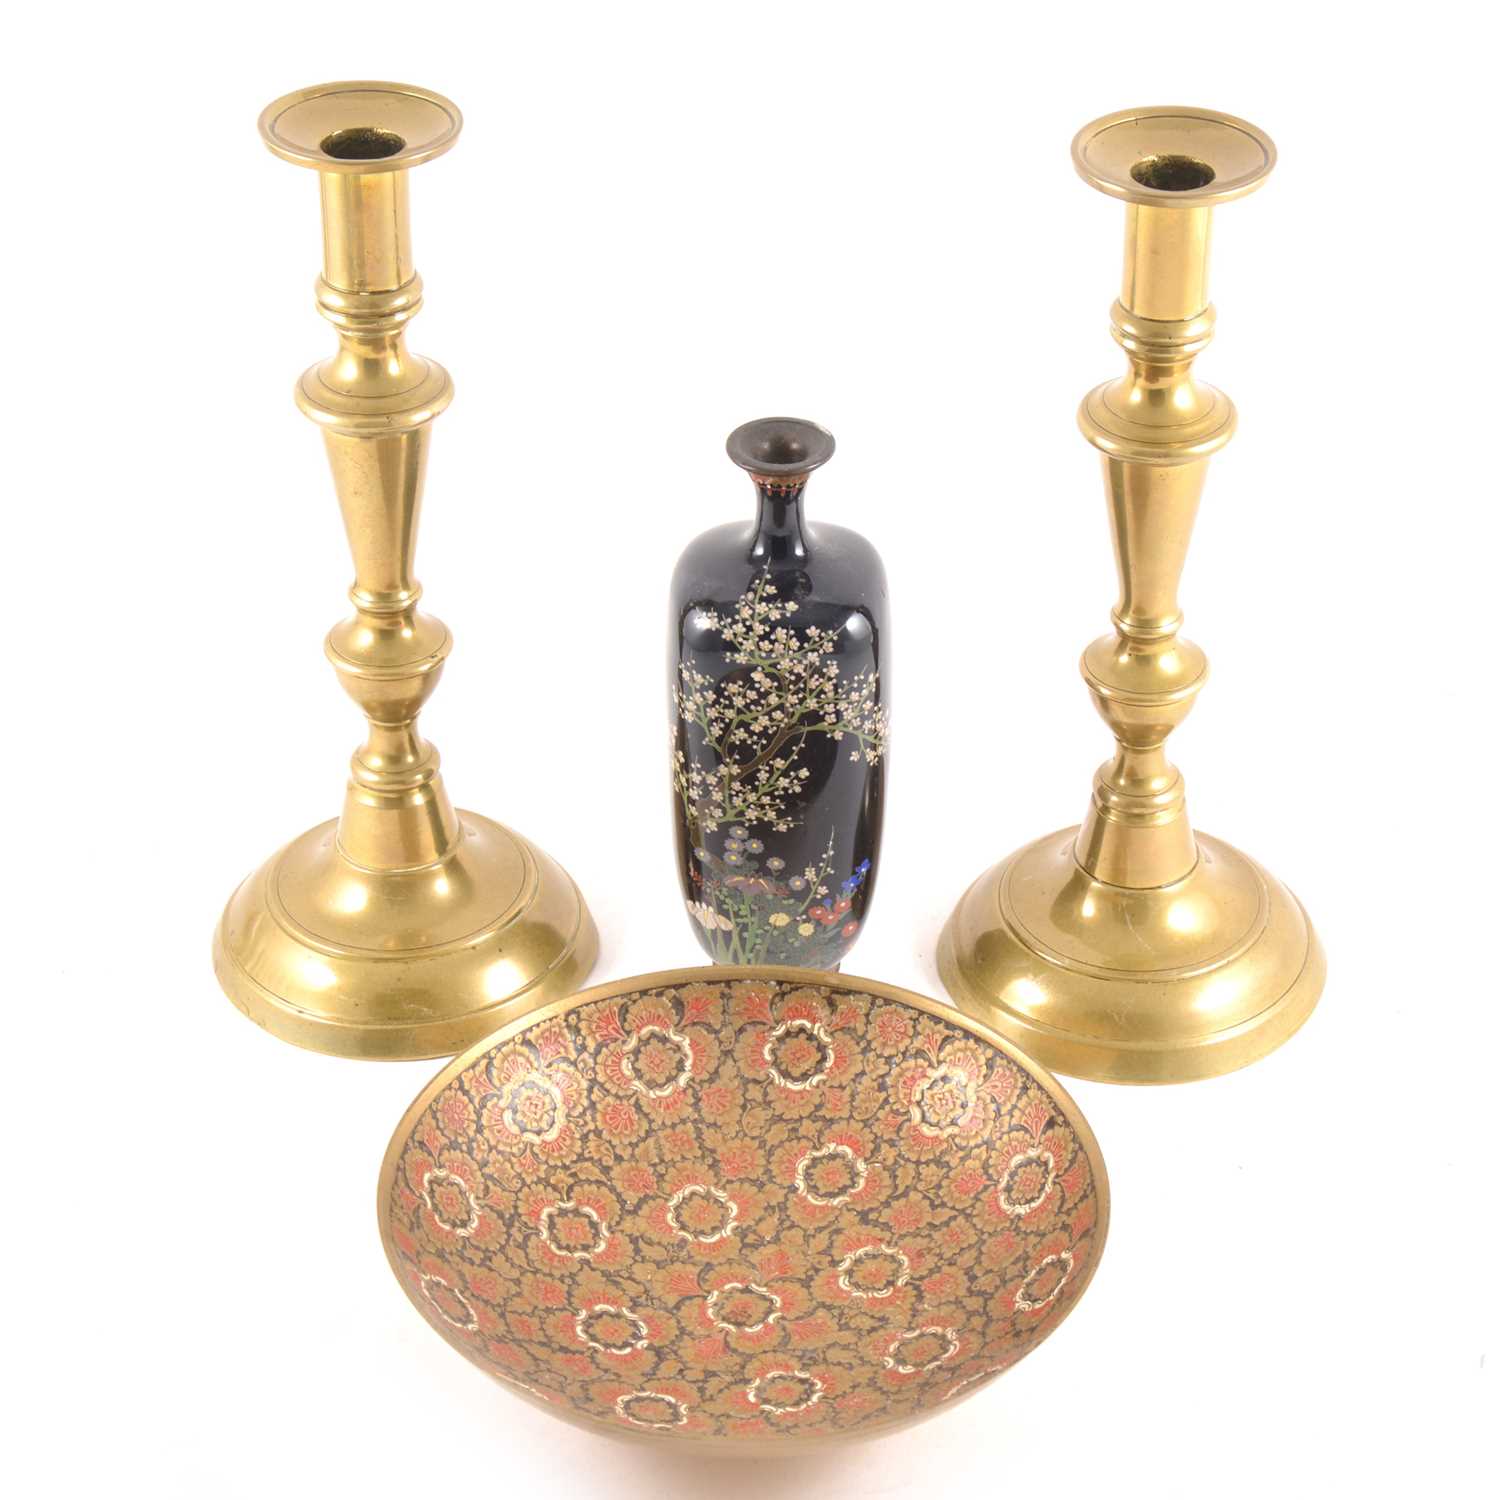 Lot 138 - A pair of brass candlesticks, a cloisonne vase (damaged) and assorted metalwares.